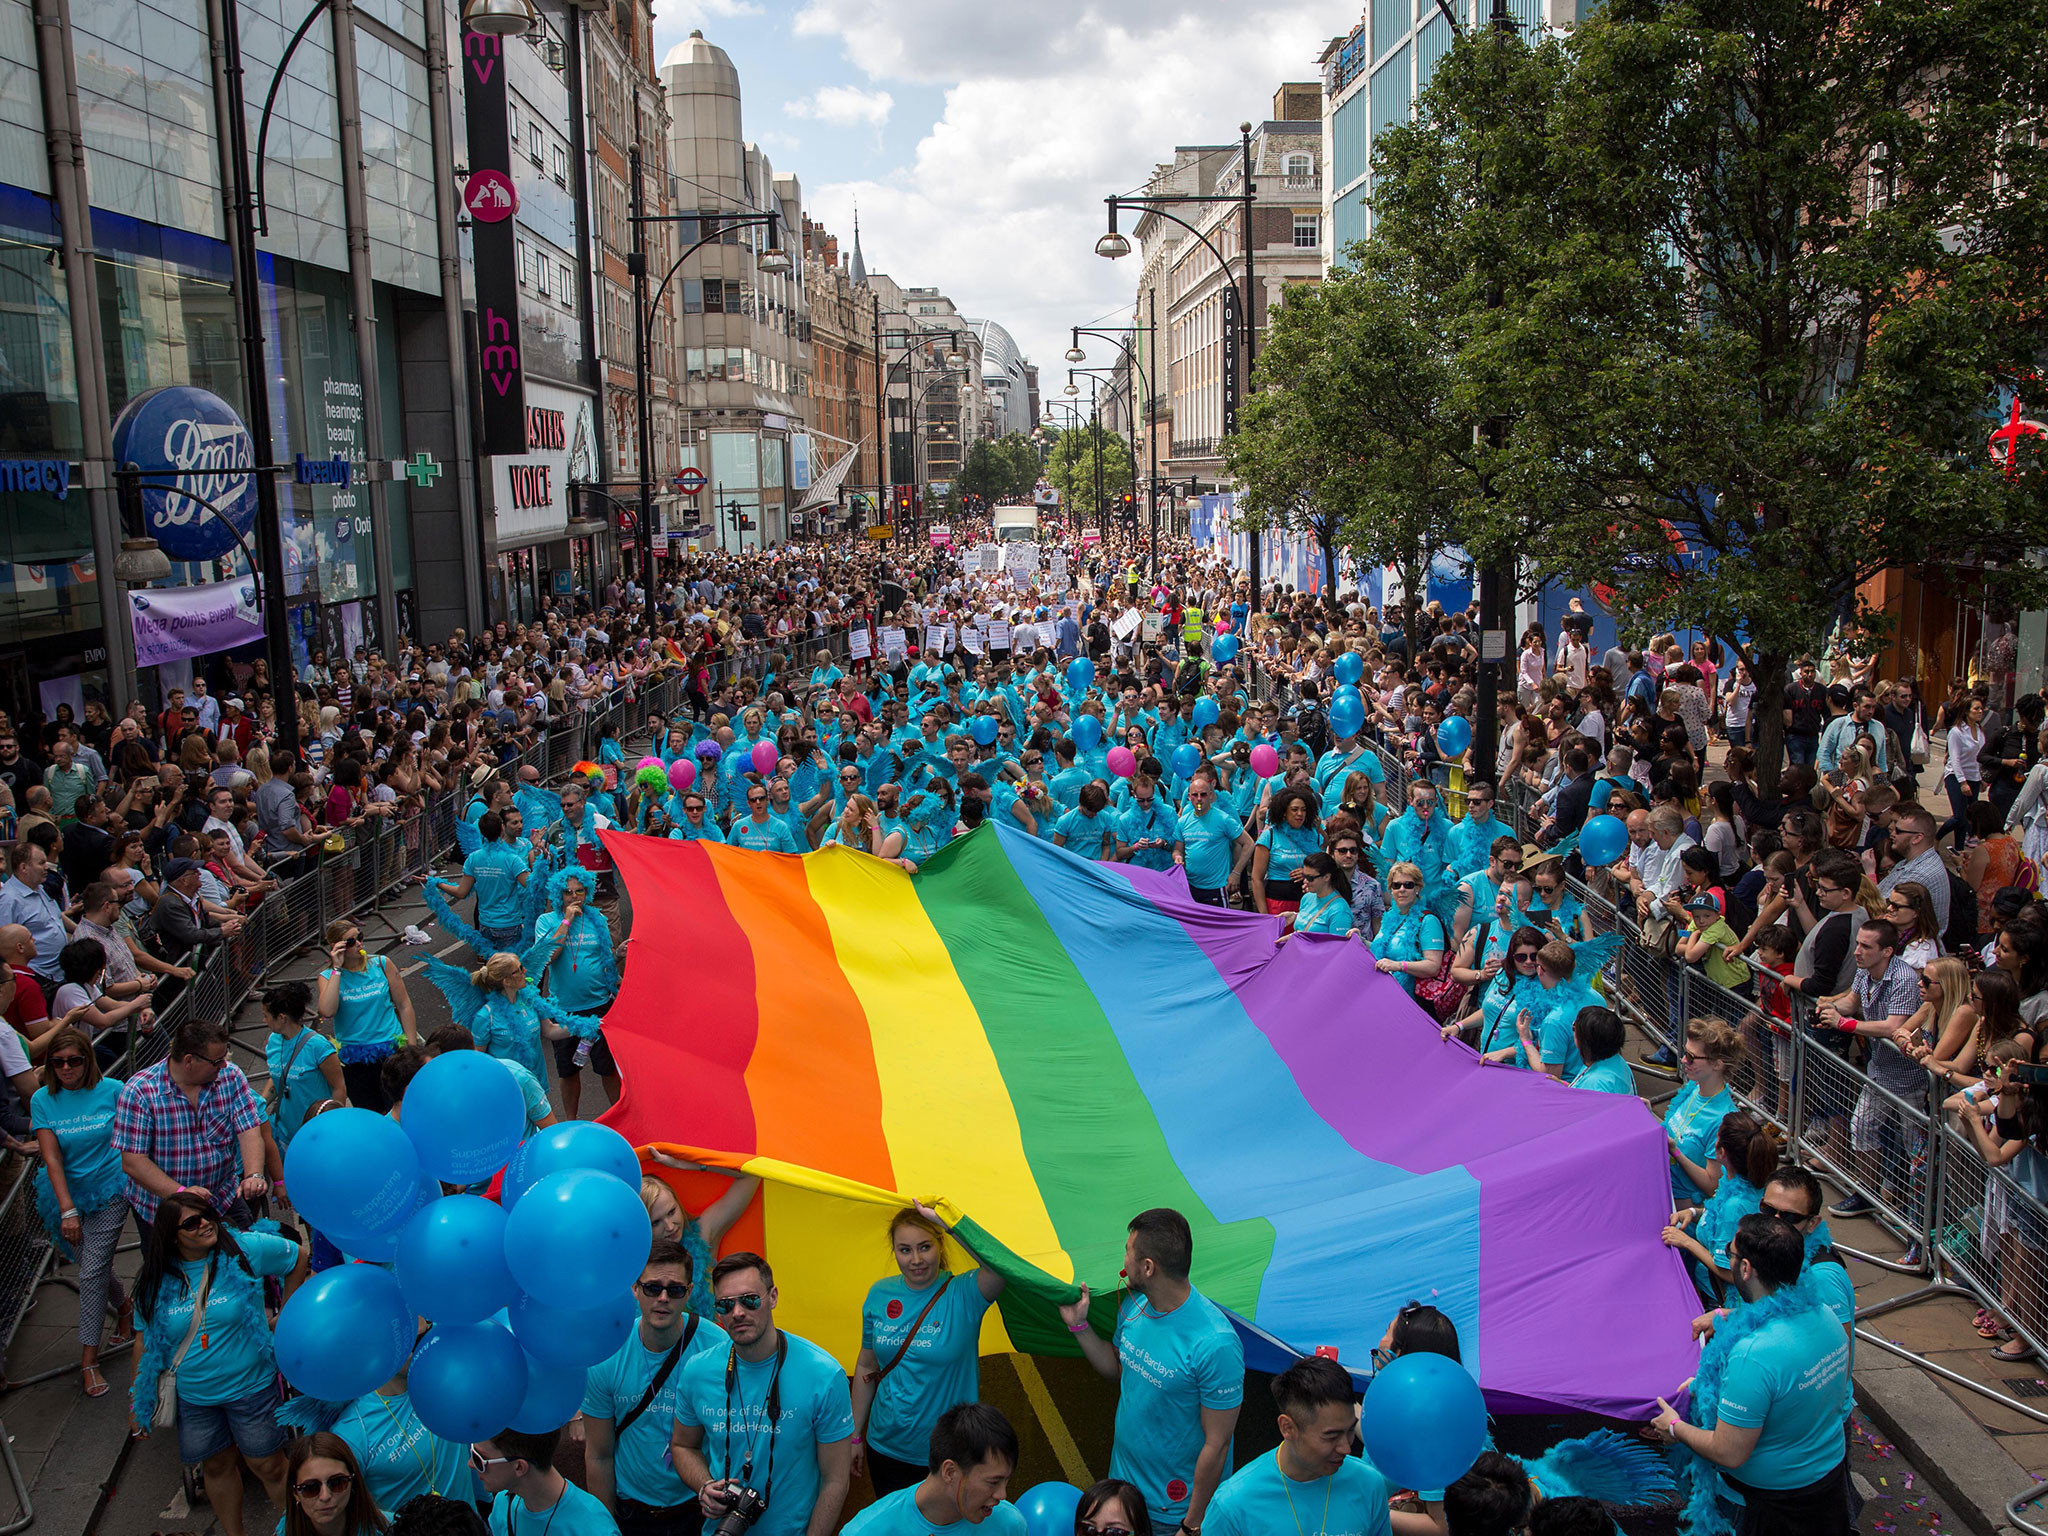 2048x1536 London Pride: 30,000 take part in biggest ever gay pride parade | The  Independent